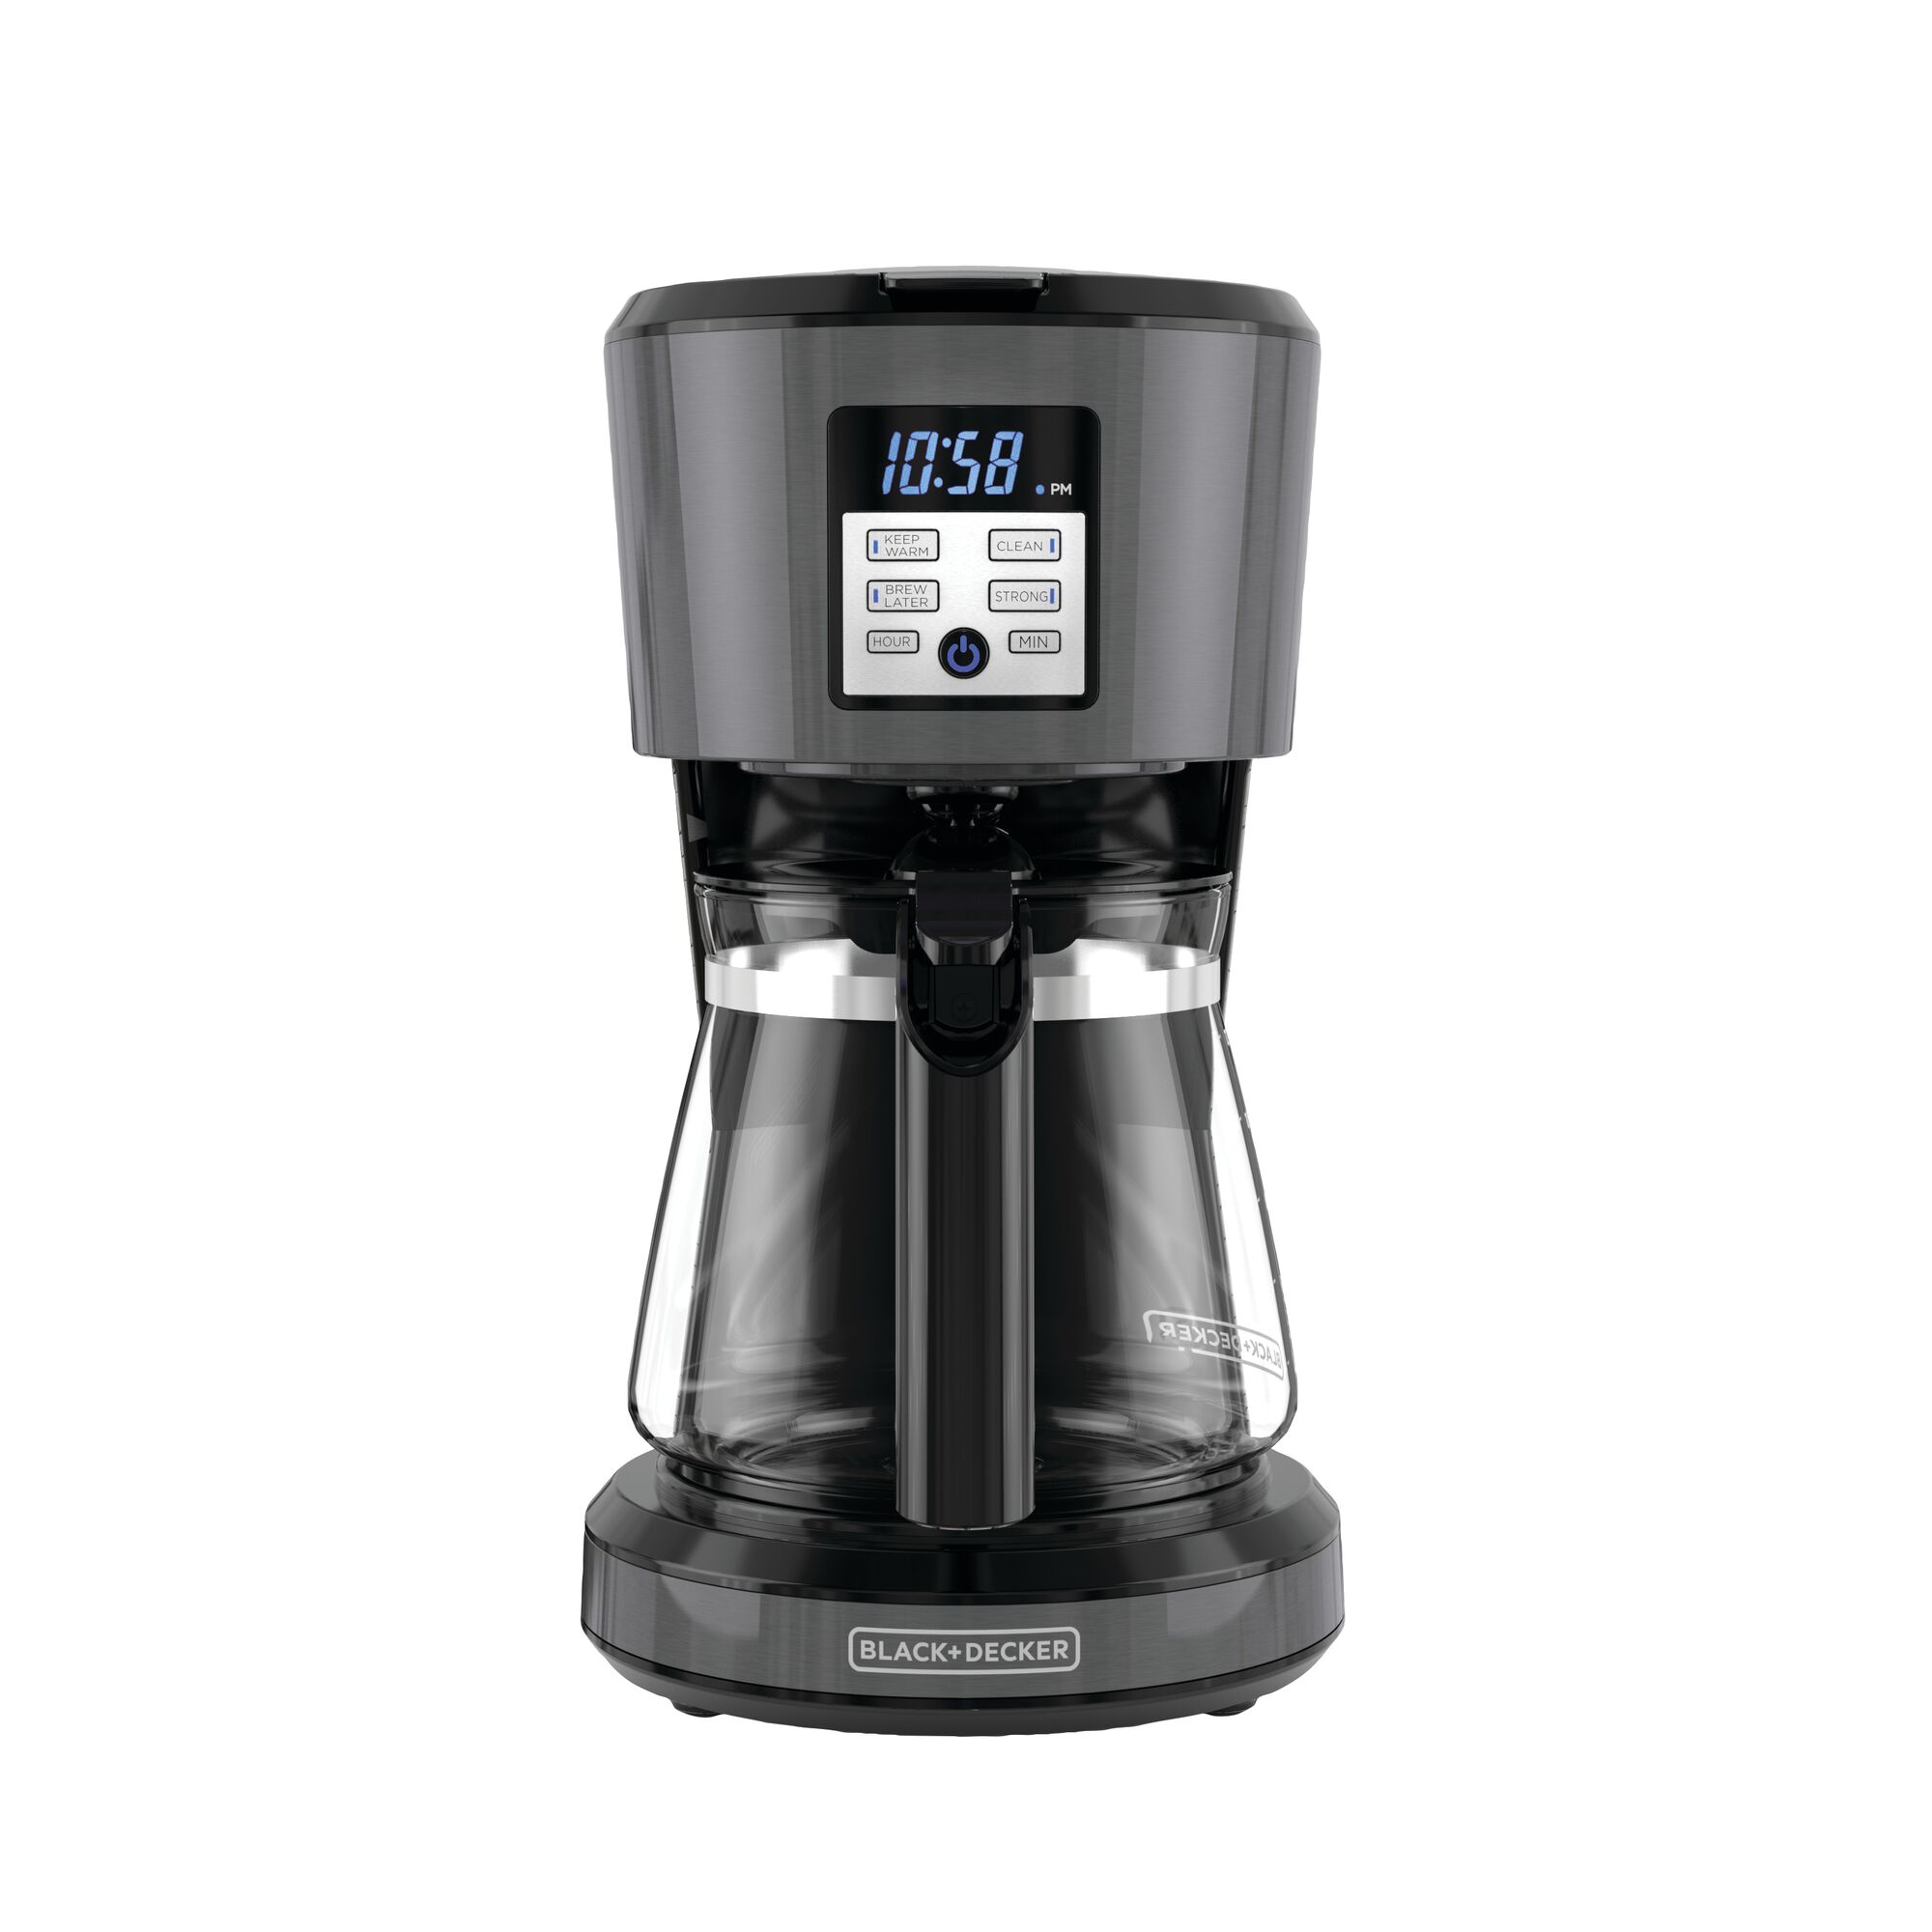 Profile of 12 cup coffeemaker programmable exclusive vortex technology.